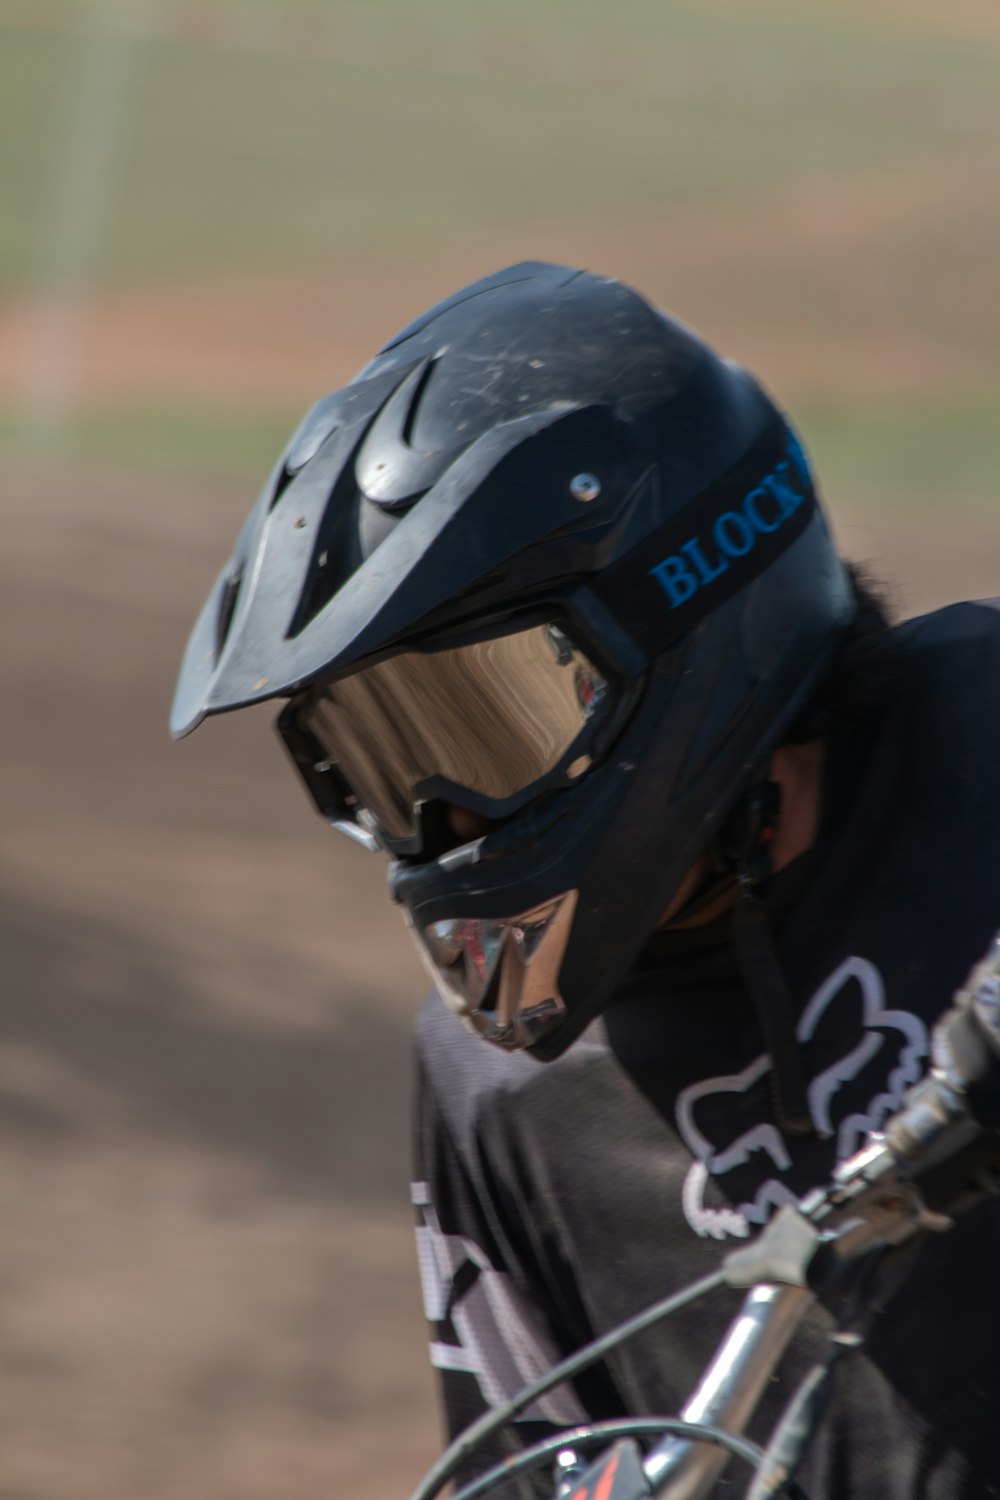 a close up of a person wearing a helmet on a bike